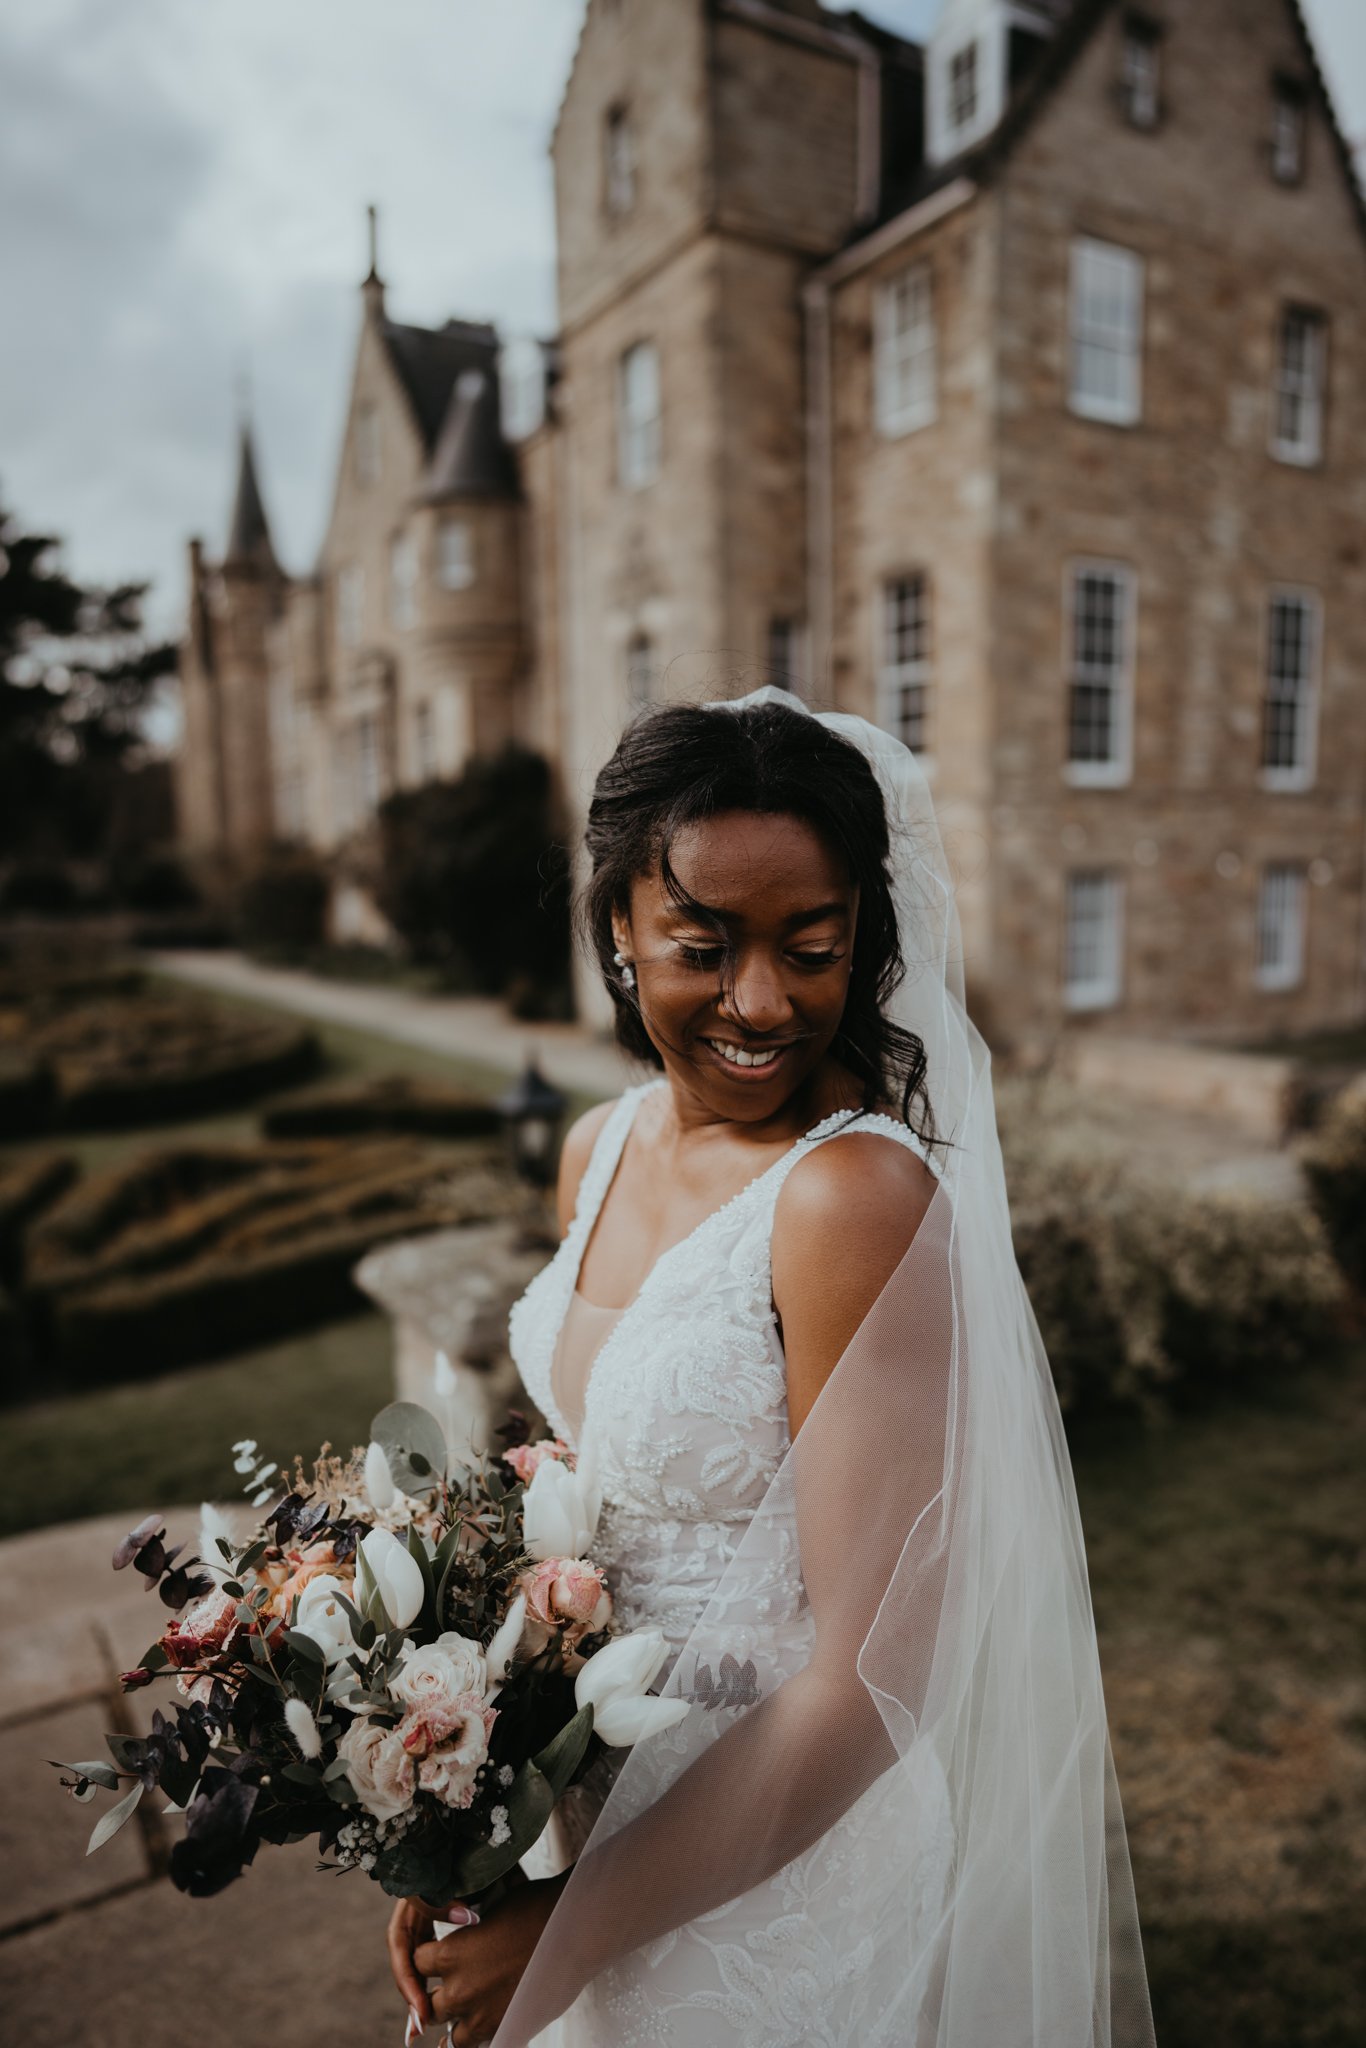  A beautiful destination wedding at Carberry Tower Manion House Scotland. 